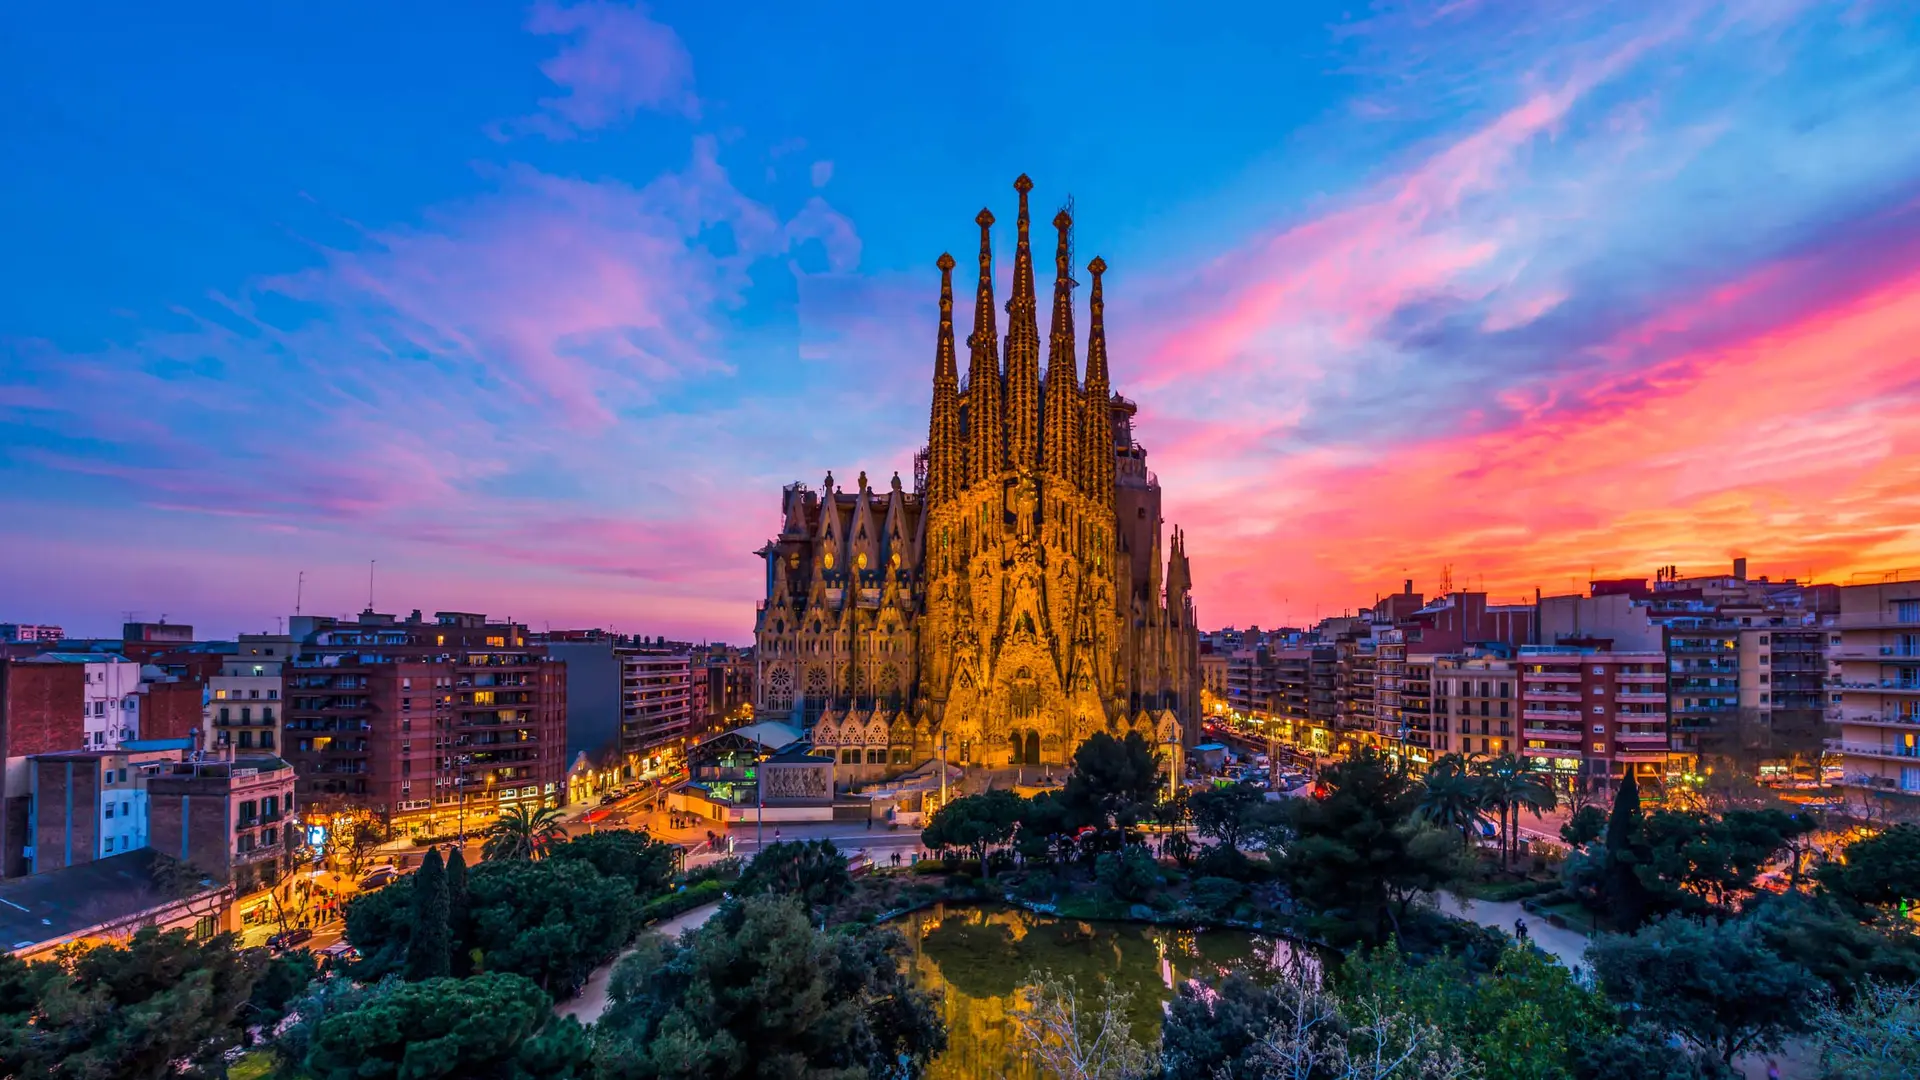 View of the iconic The Sagrada Familia with a tall tower, beautiful sunset, and large park with water and nature in Barcelona, Spain.